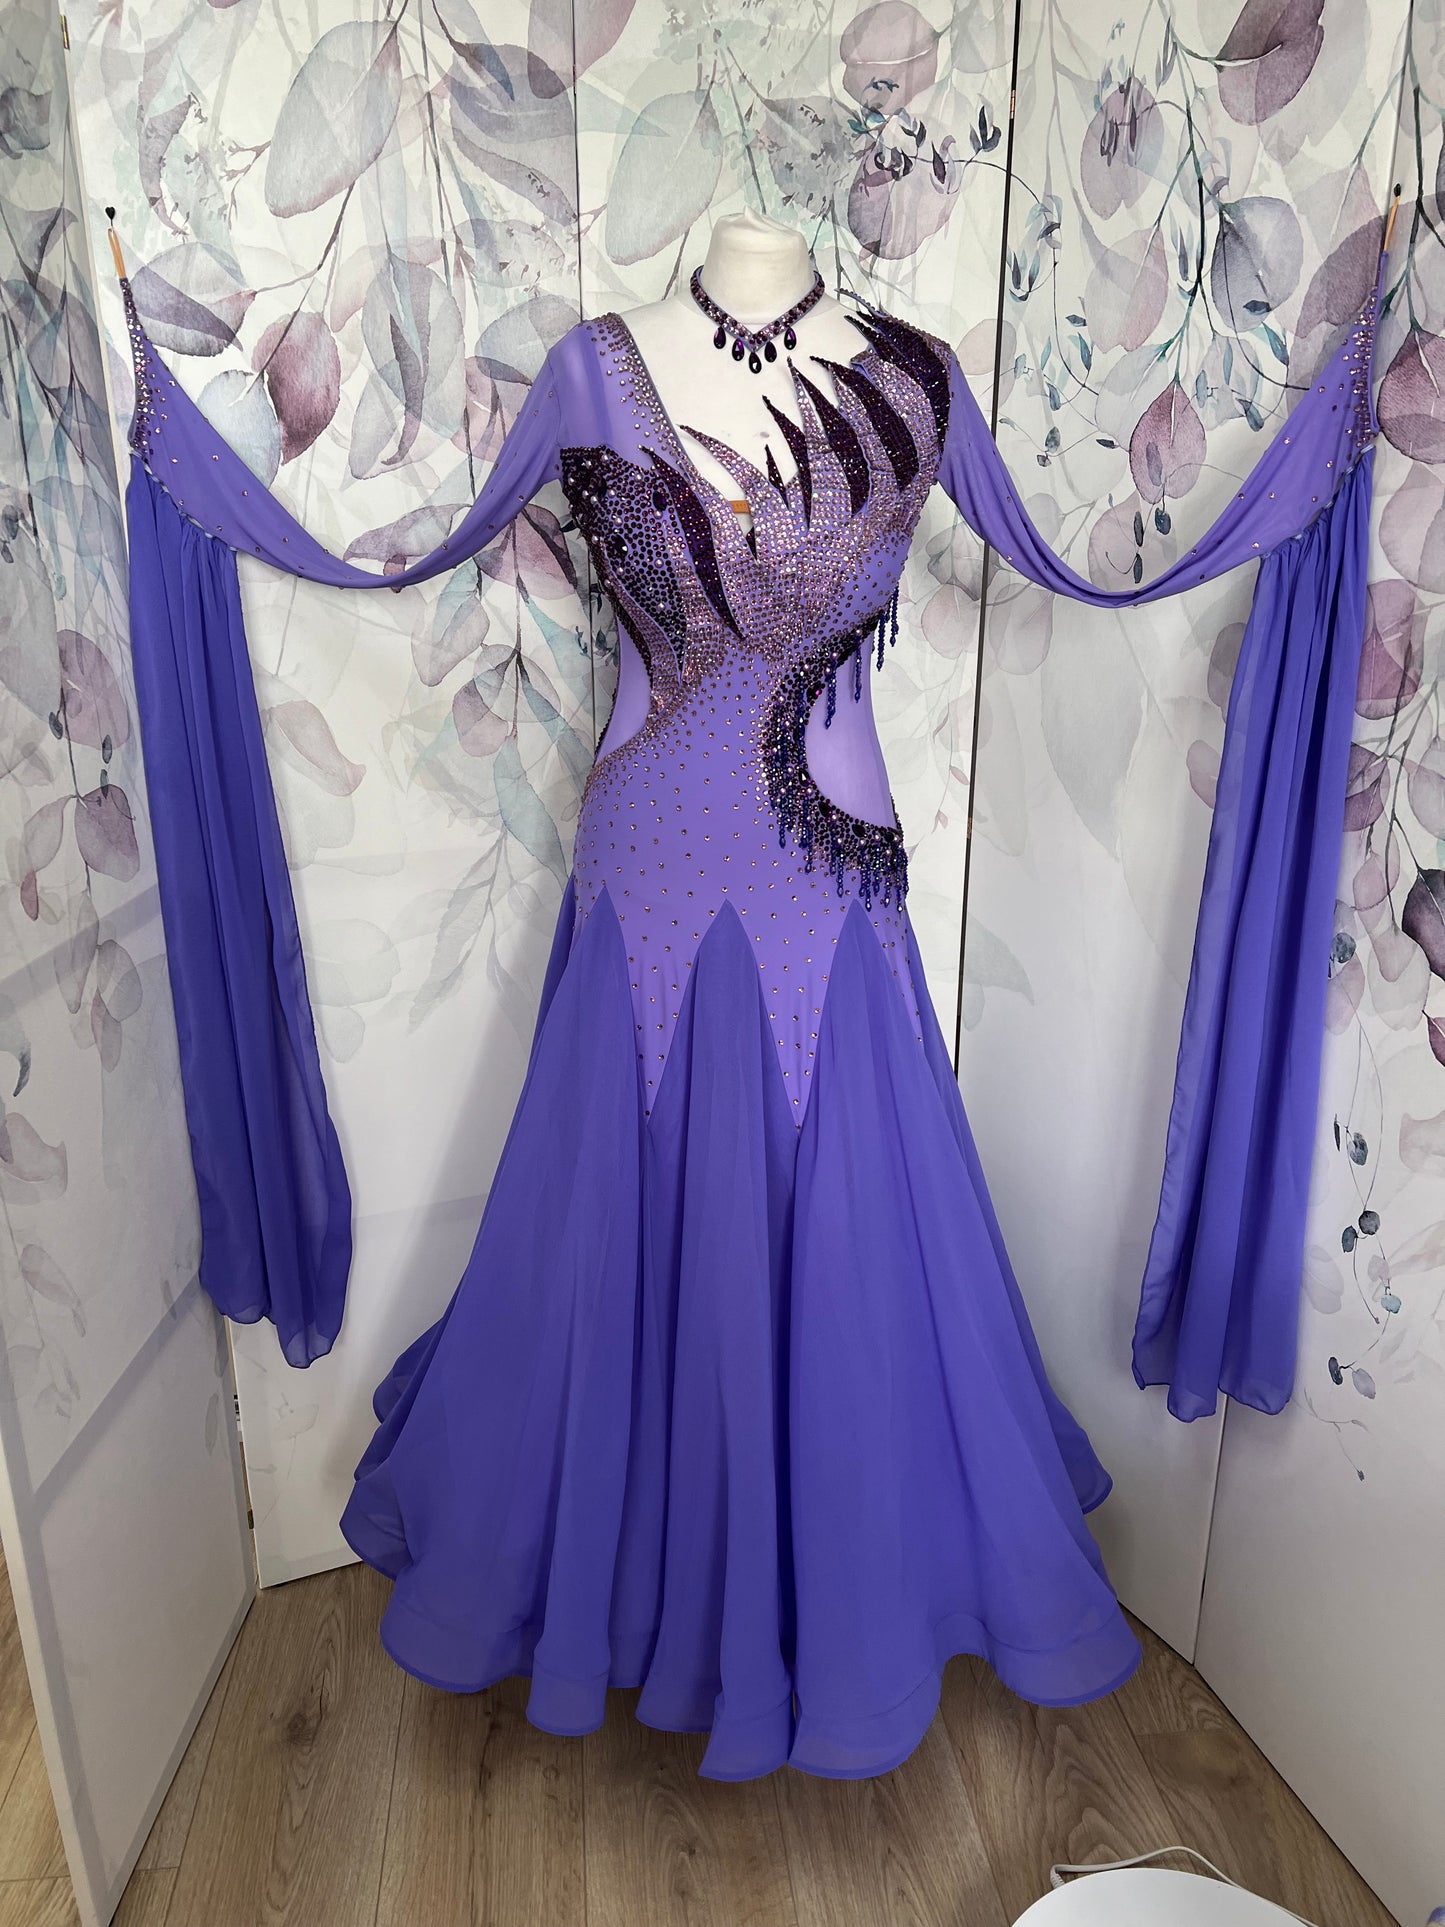 128 Lilac Ballroom Dress with detachable floats. Detailing to the front chest & Back stoned in Amethyst, Light Amethyst & Purple